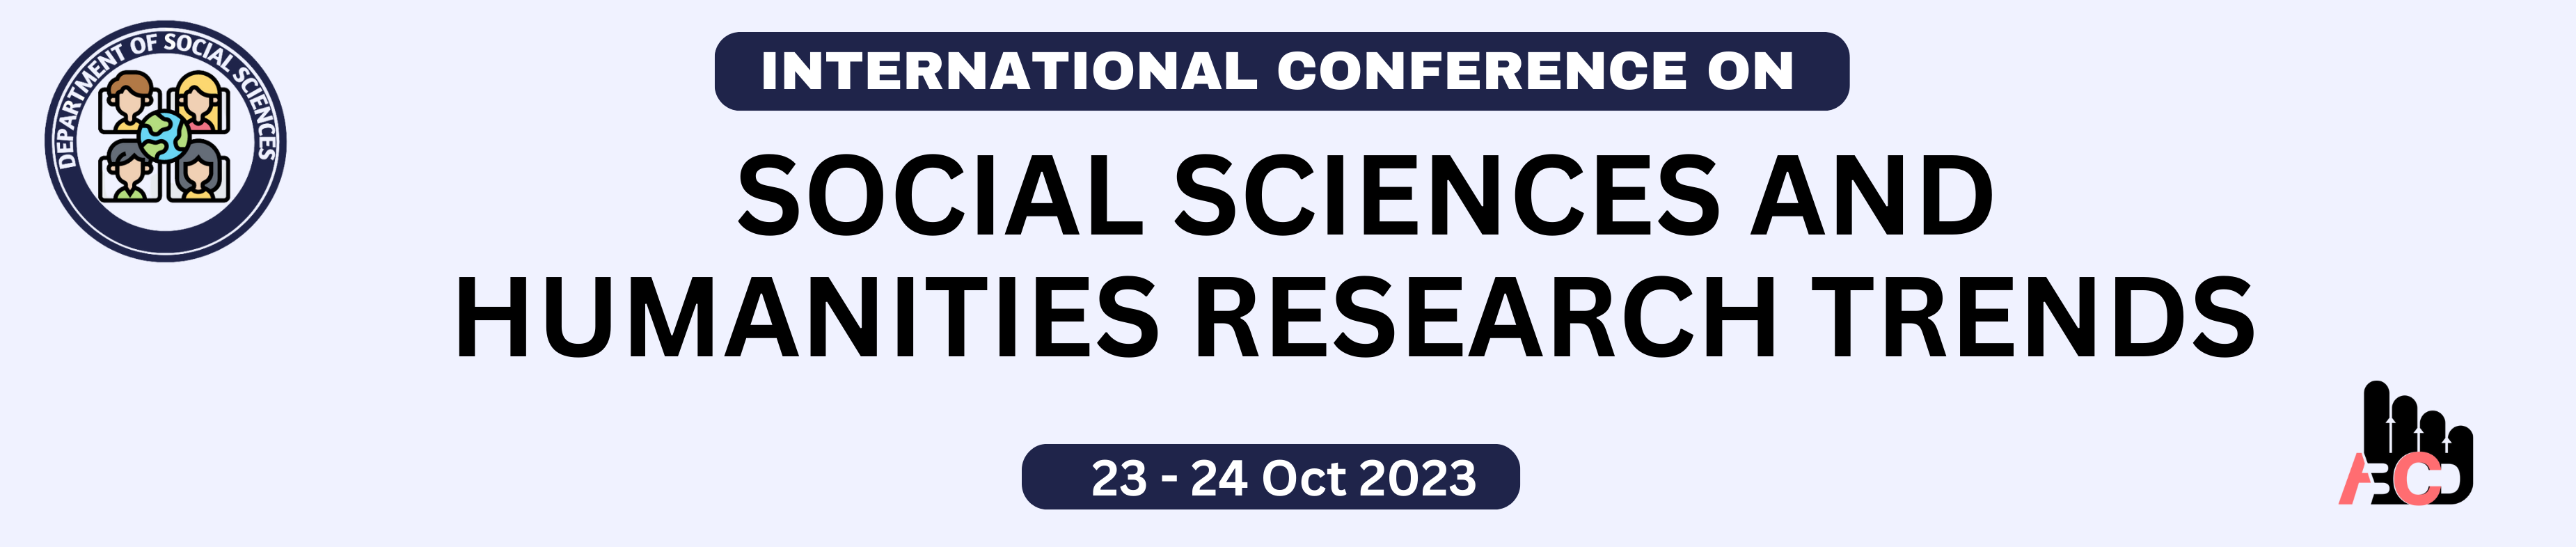 International Conference on Social Sciences and Humanities Research Trends, Bhopal, Madhya Pradesh, India